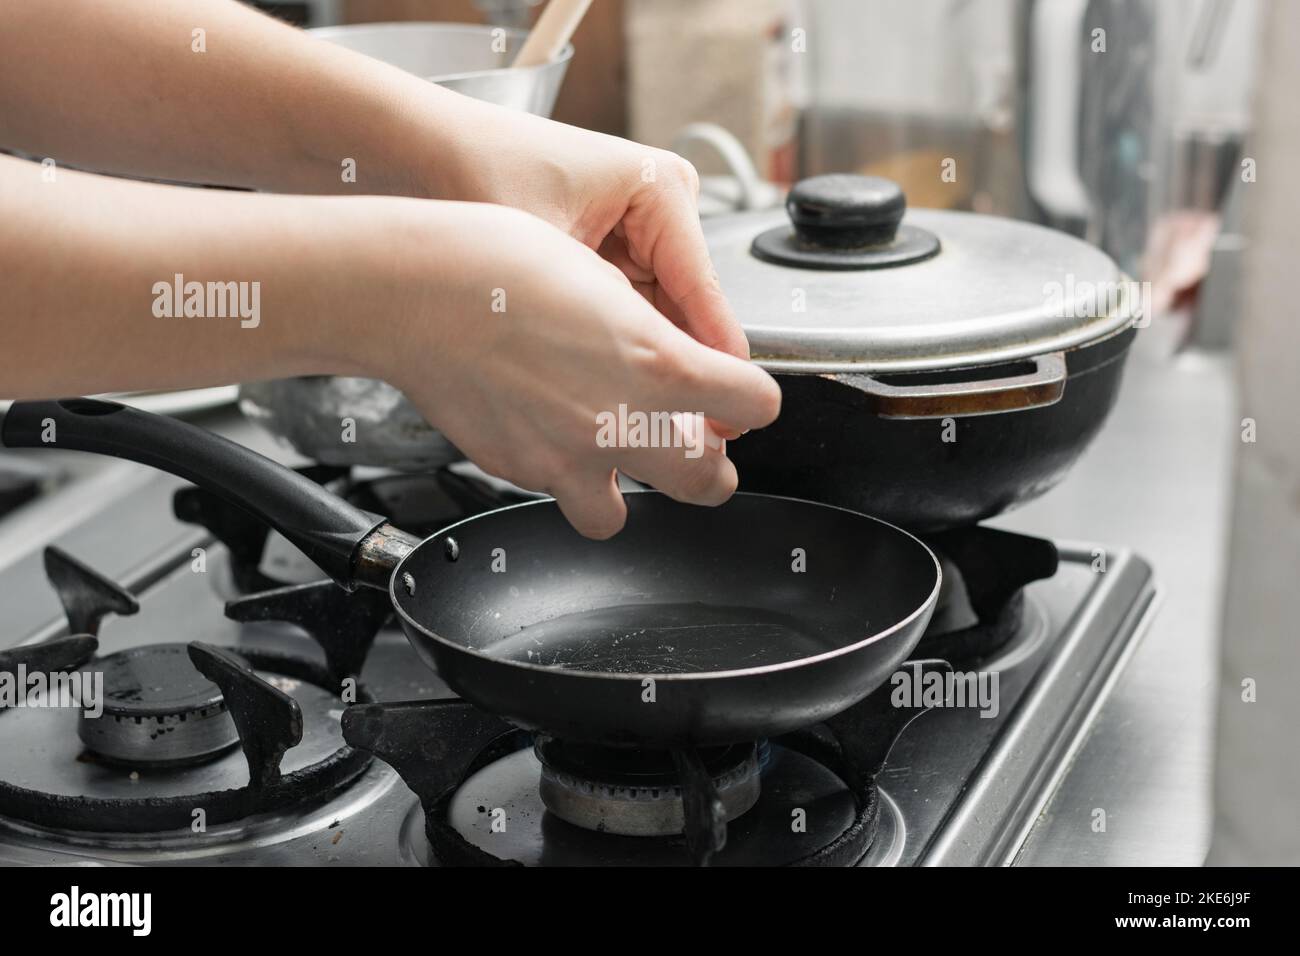 hand of a woman opening an egg to fry it in a small frying pan, preparing a typical Colombian breakfast. Stock Photo